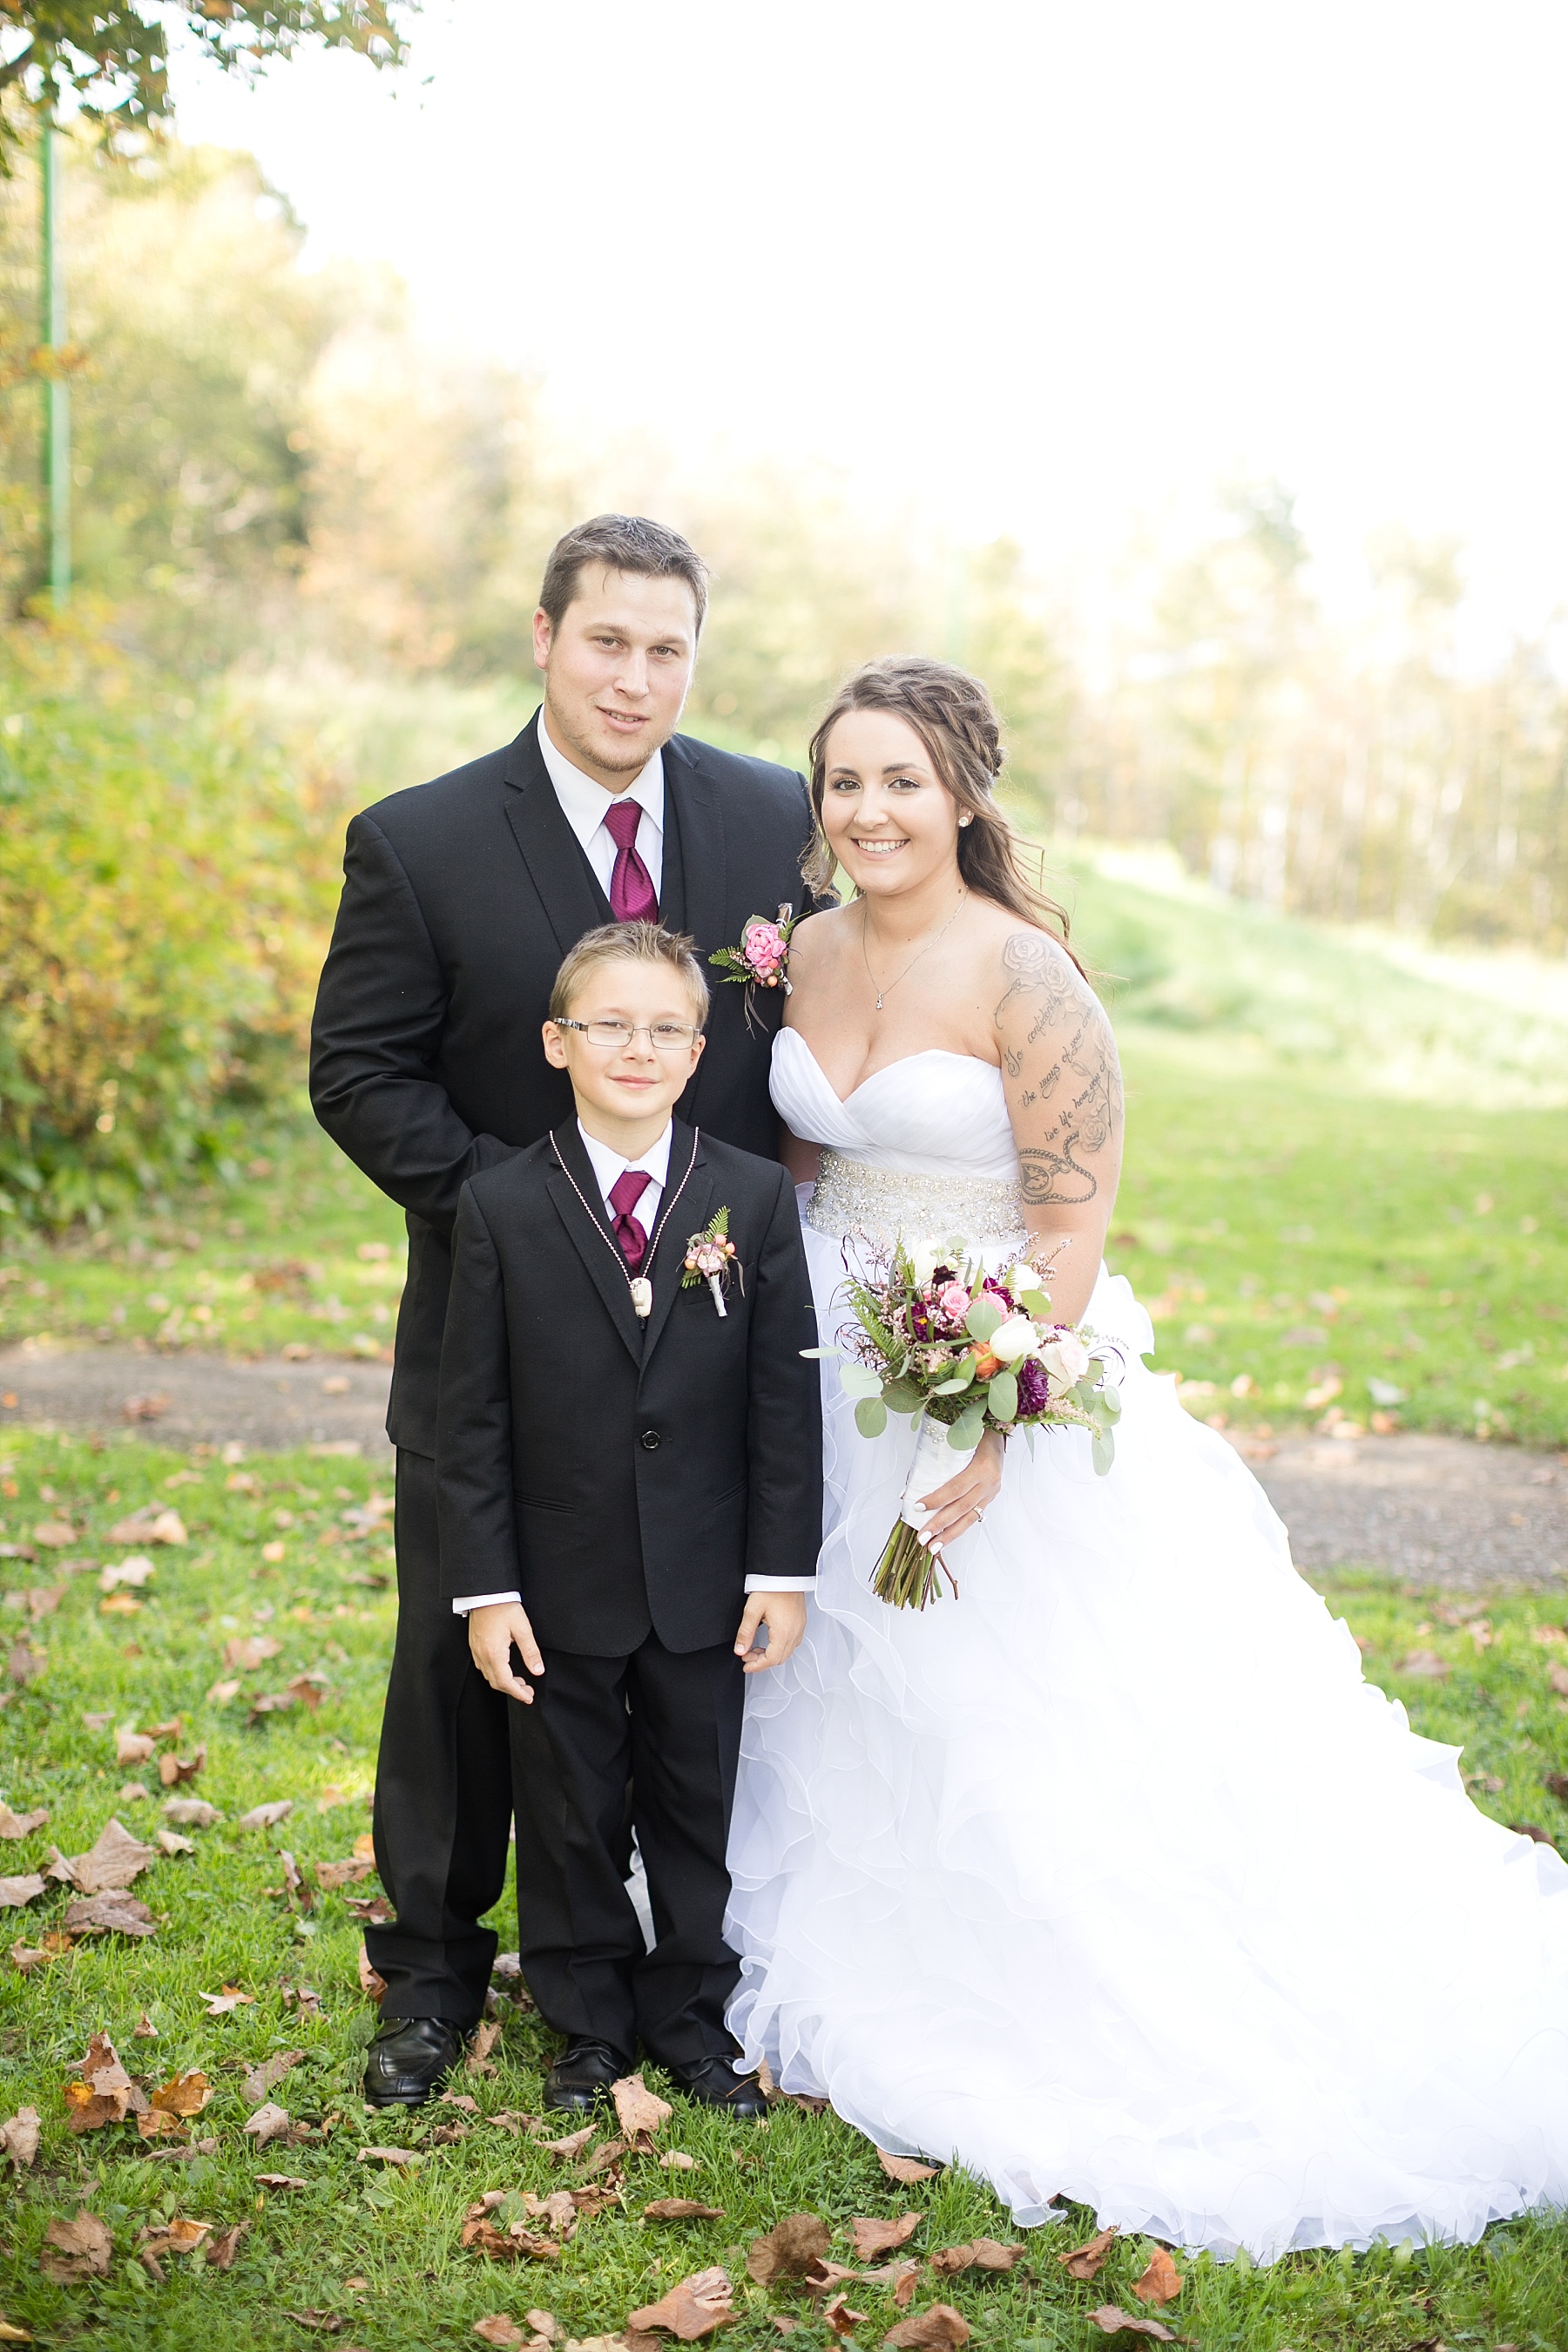 Leaves falling from the trees, a chairlift ride to see Wausau from above.. it was a wonderful fall Rib Mountain Amphitheater wedding for Bella & Dylan.